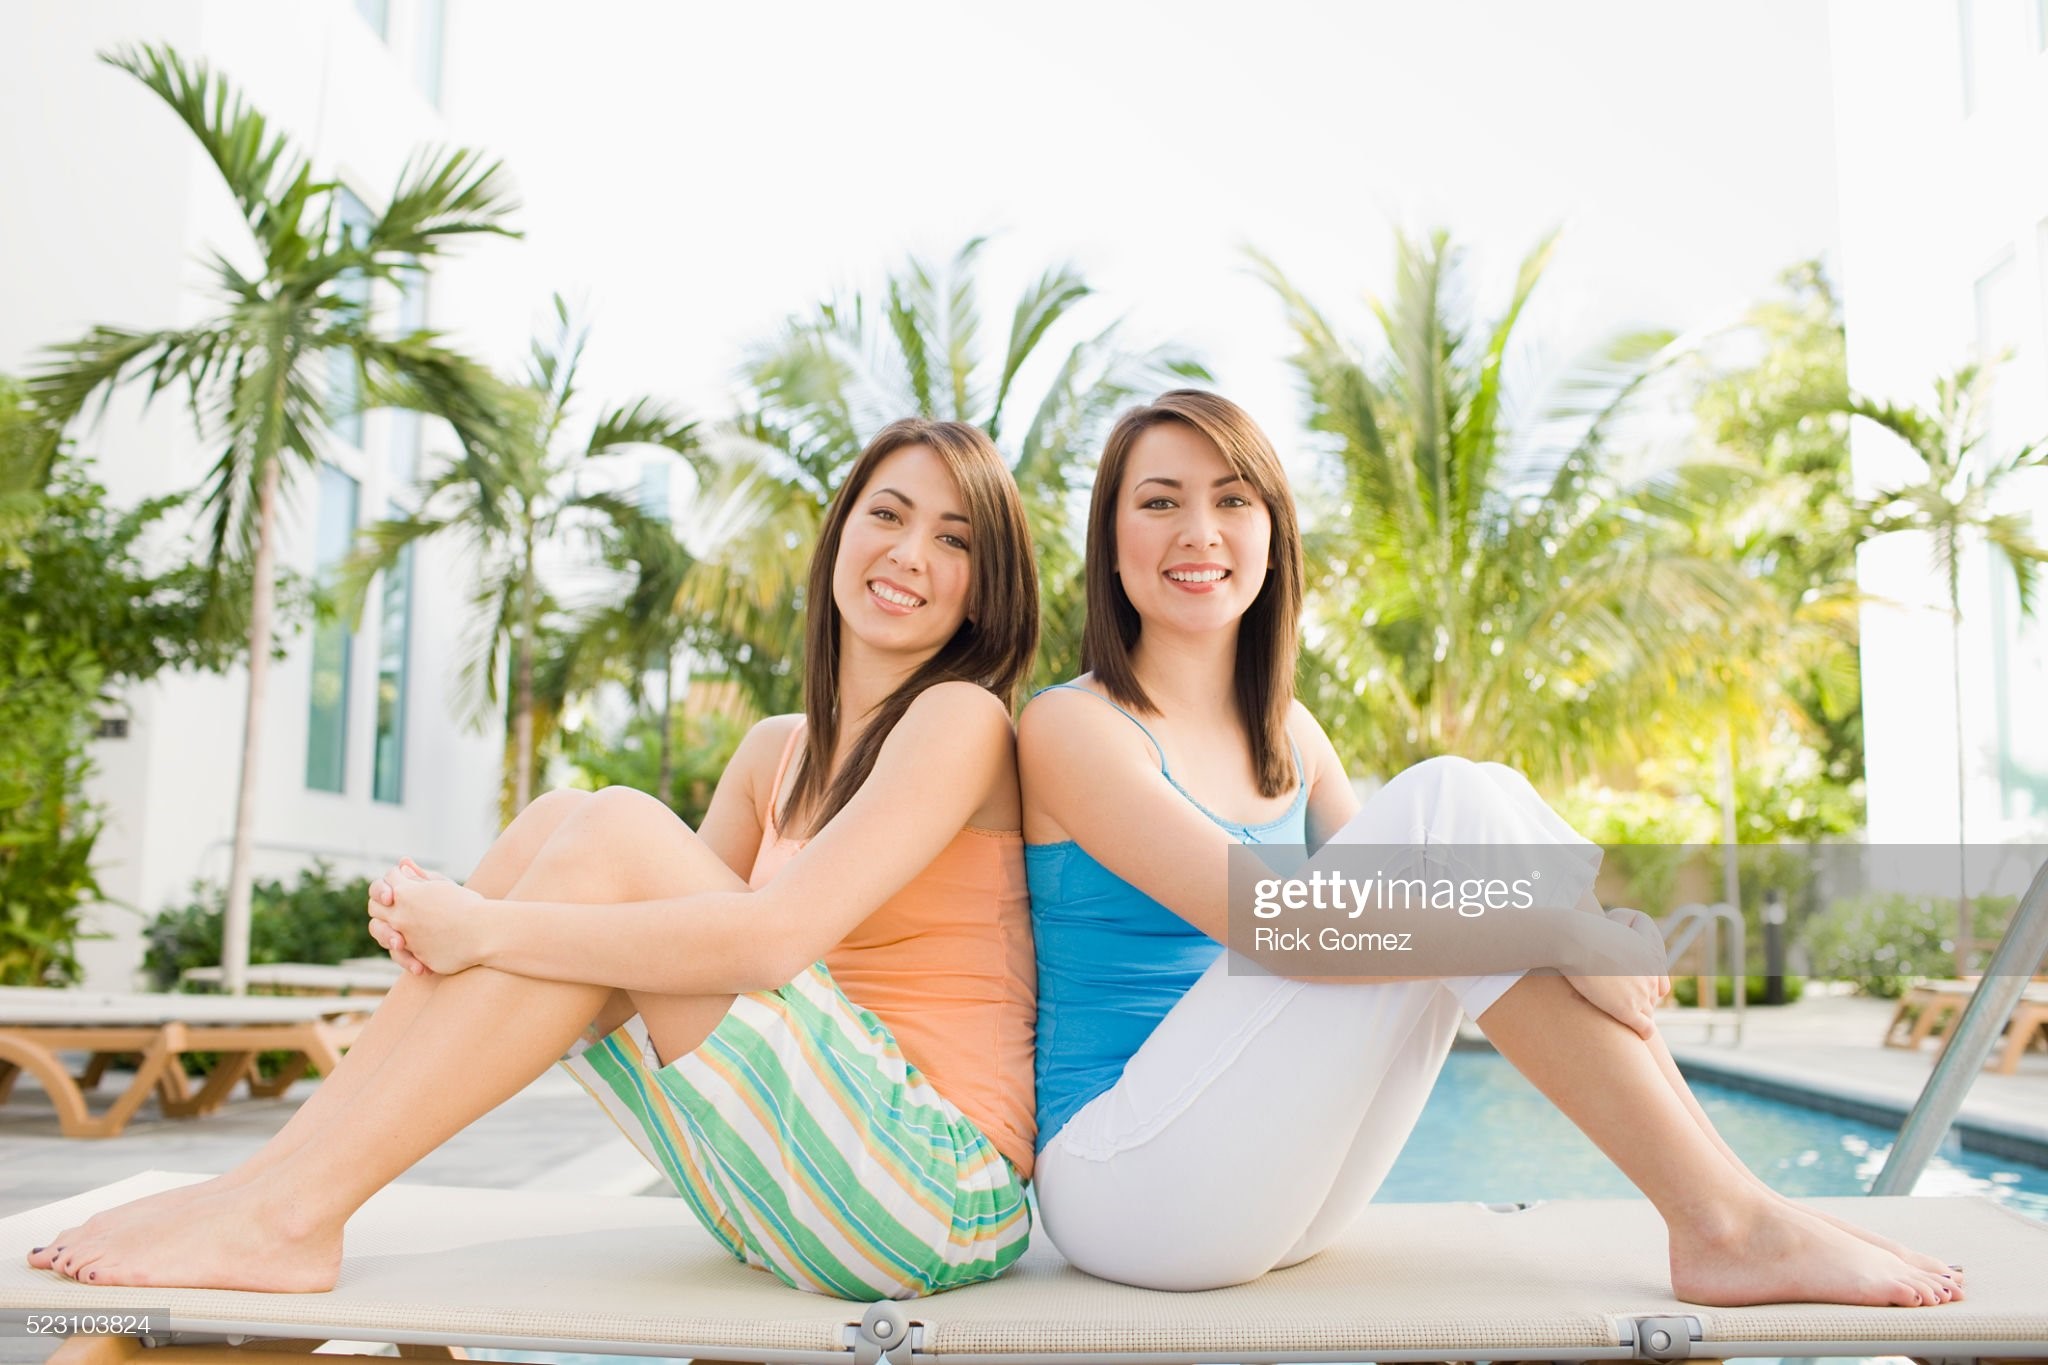 Twin sisters sitting by pool.